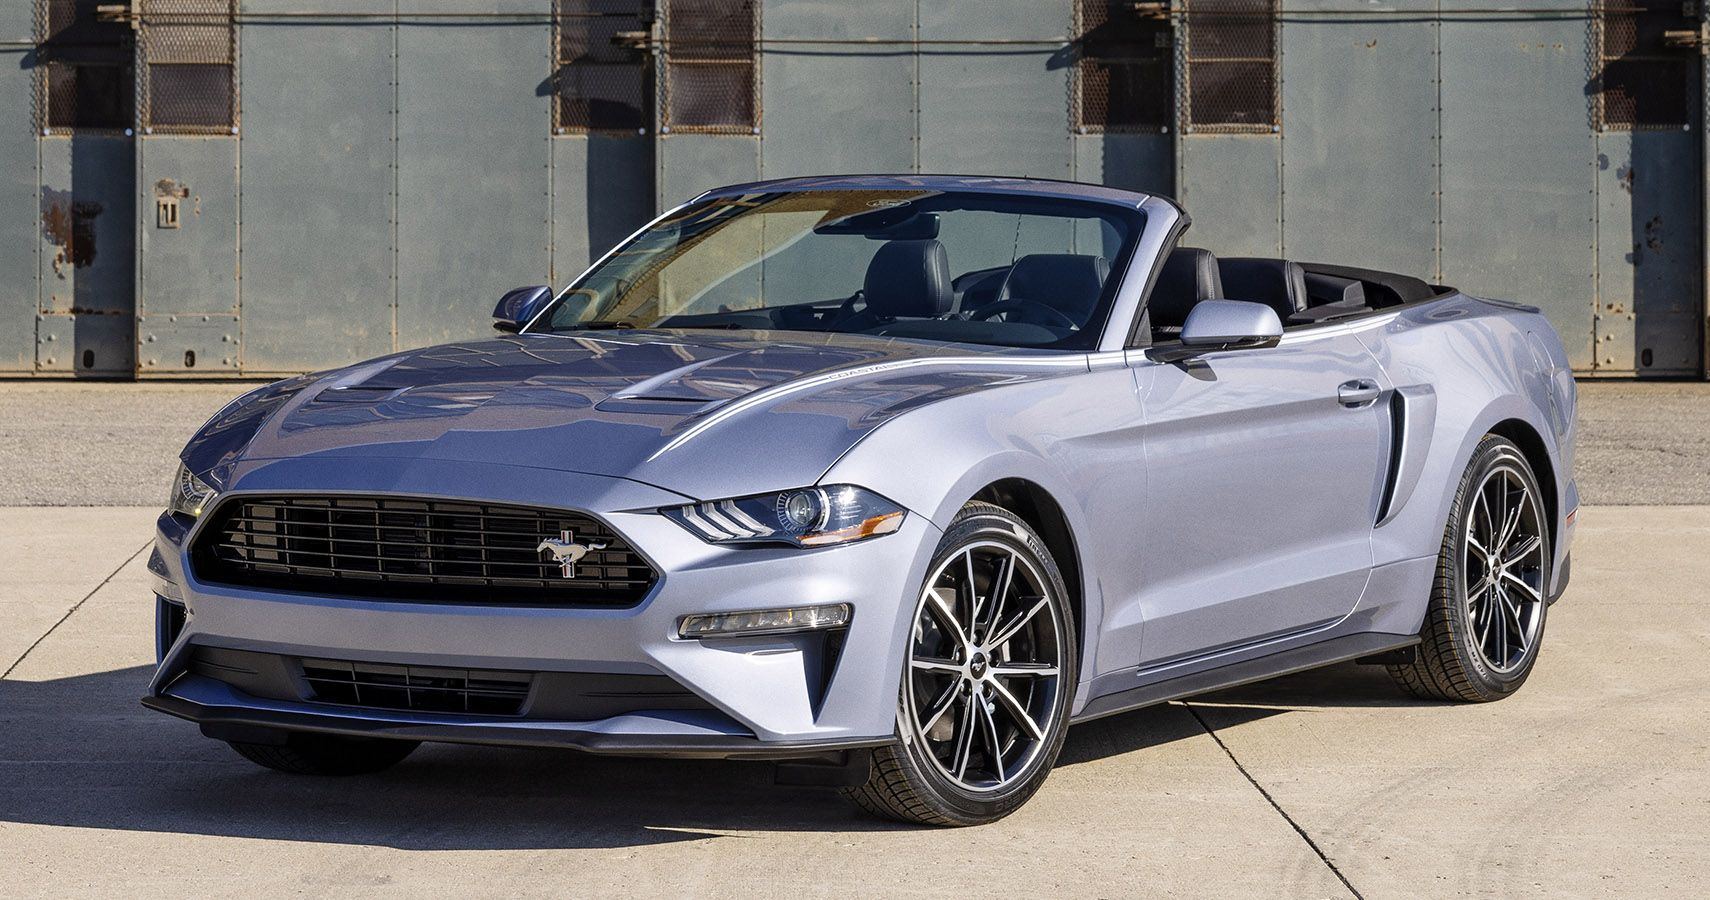 2022 Mustang Coastal Limited Edition convertible quarter front